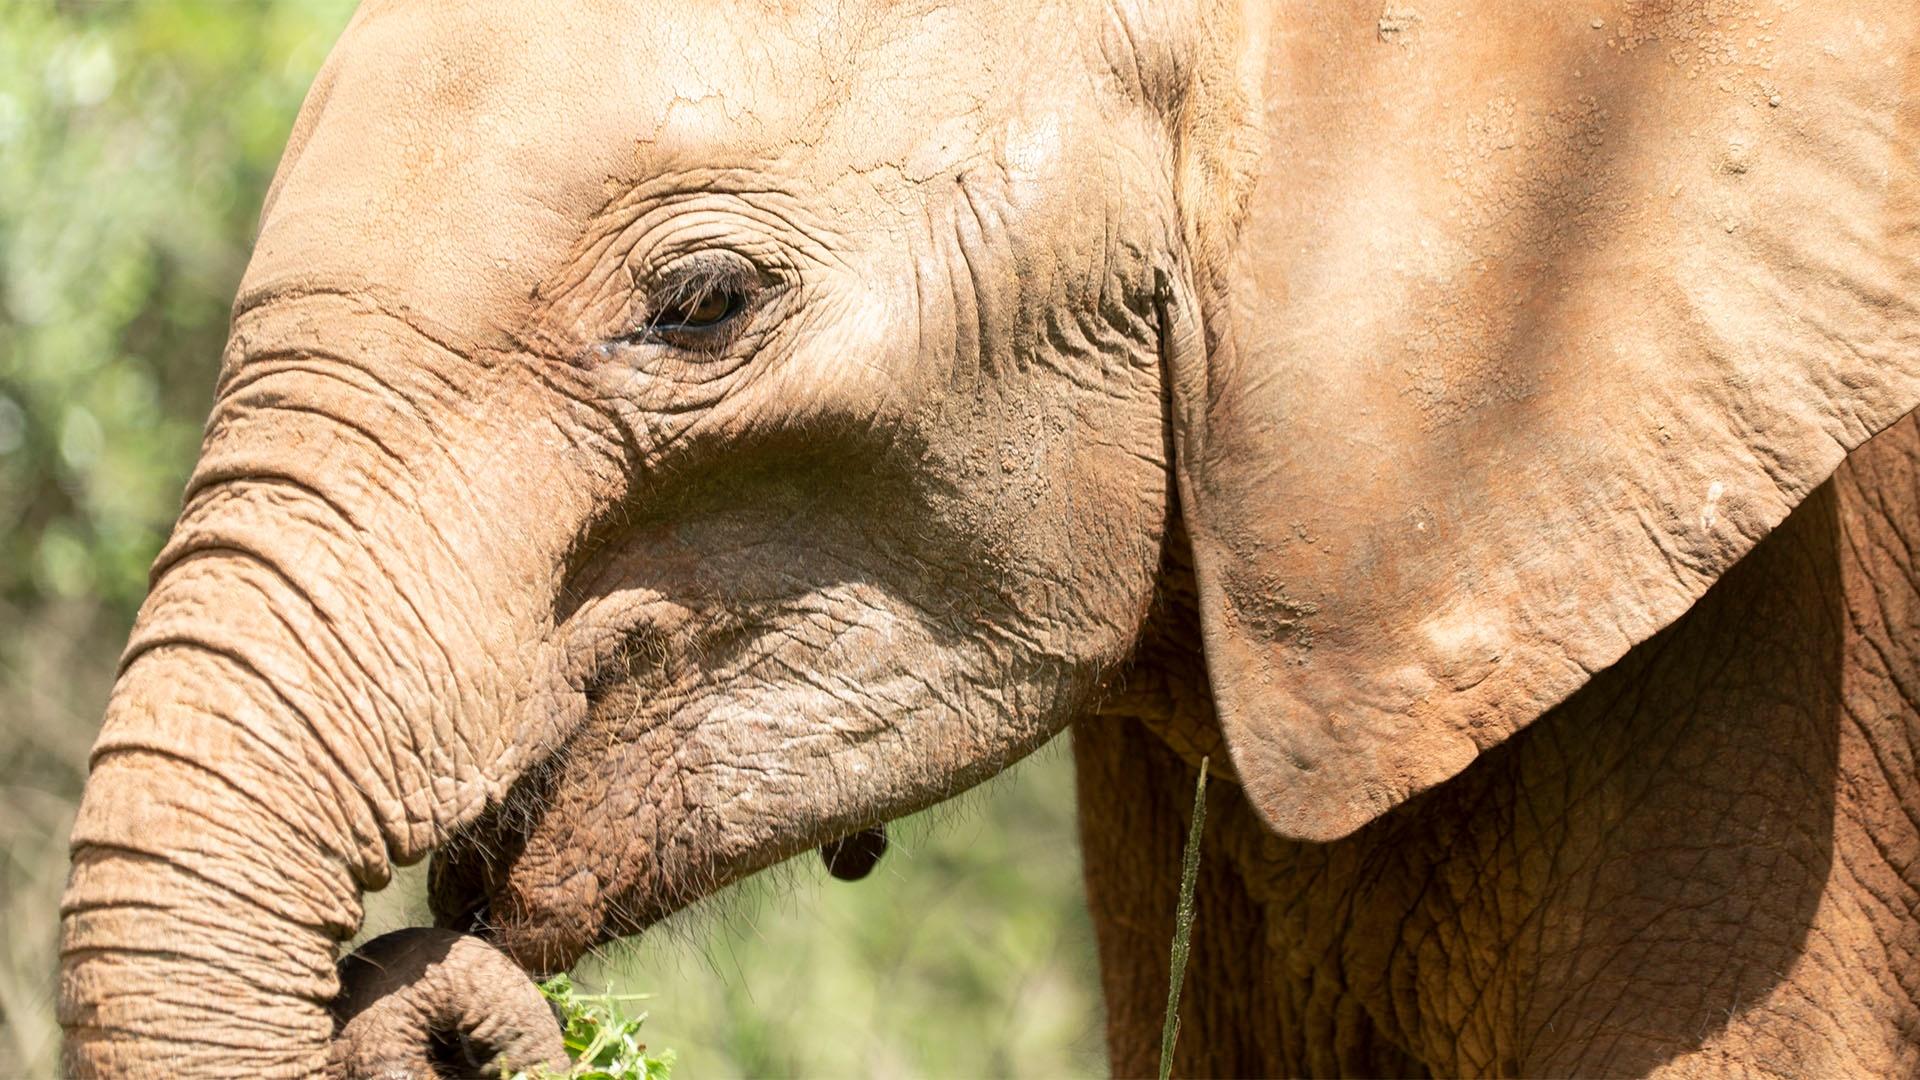 Close-up of an elephant calf eating leaves.